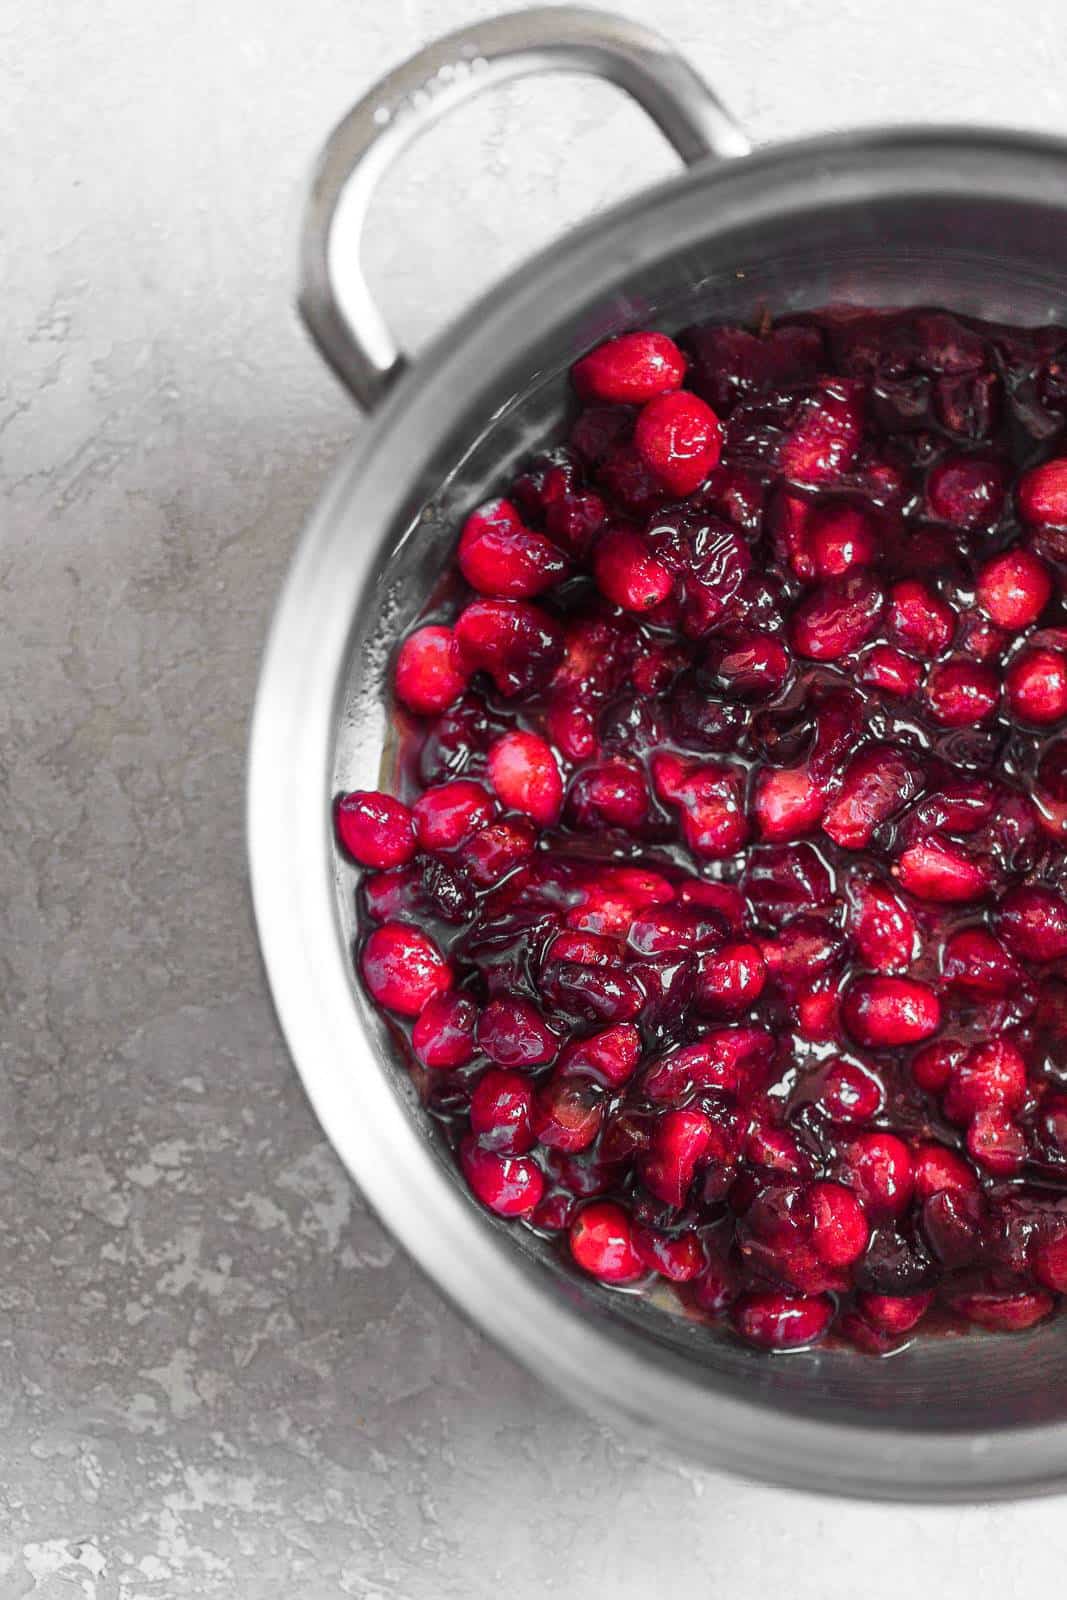 Cranberries cooking in a pot.